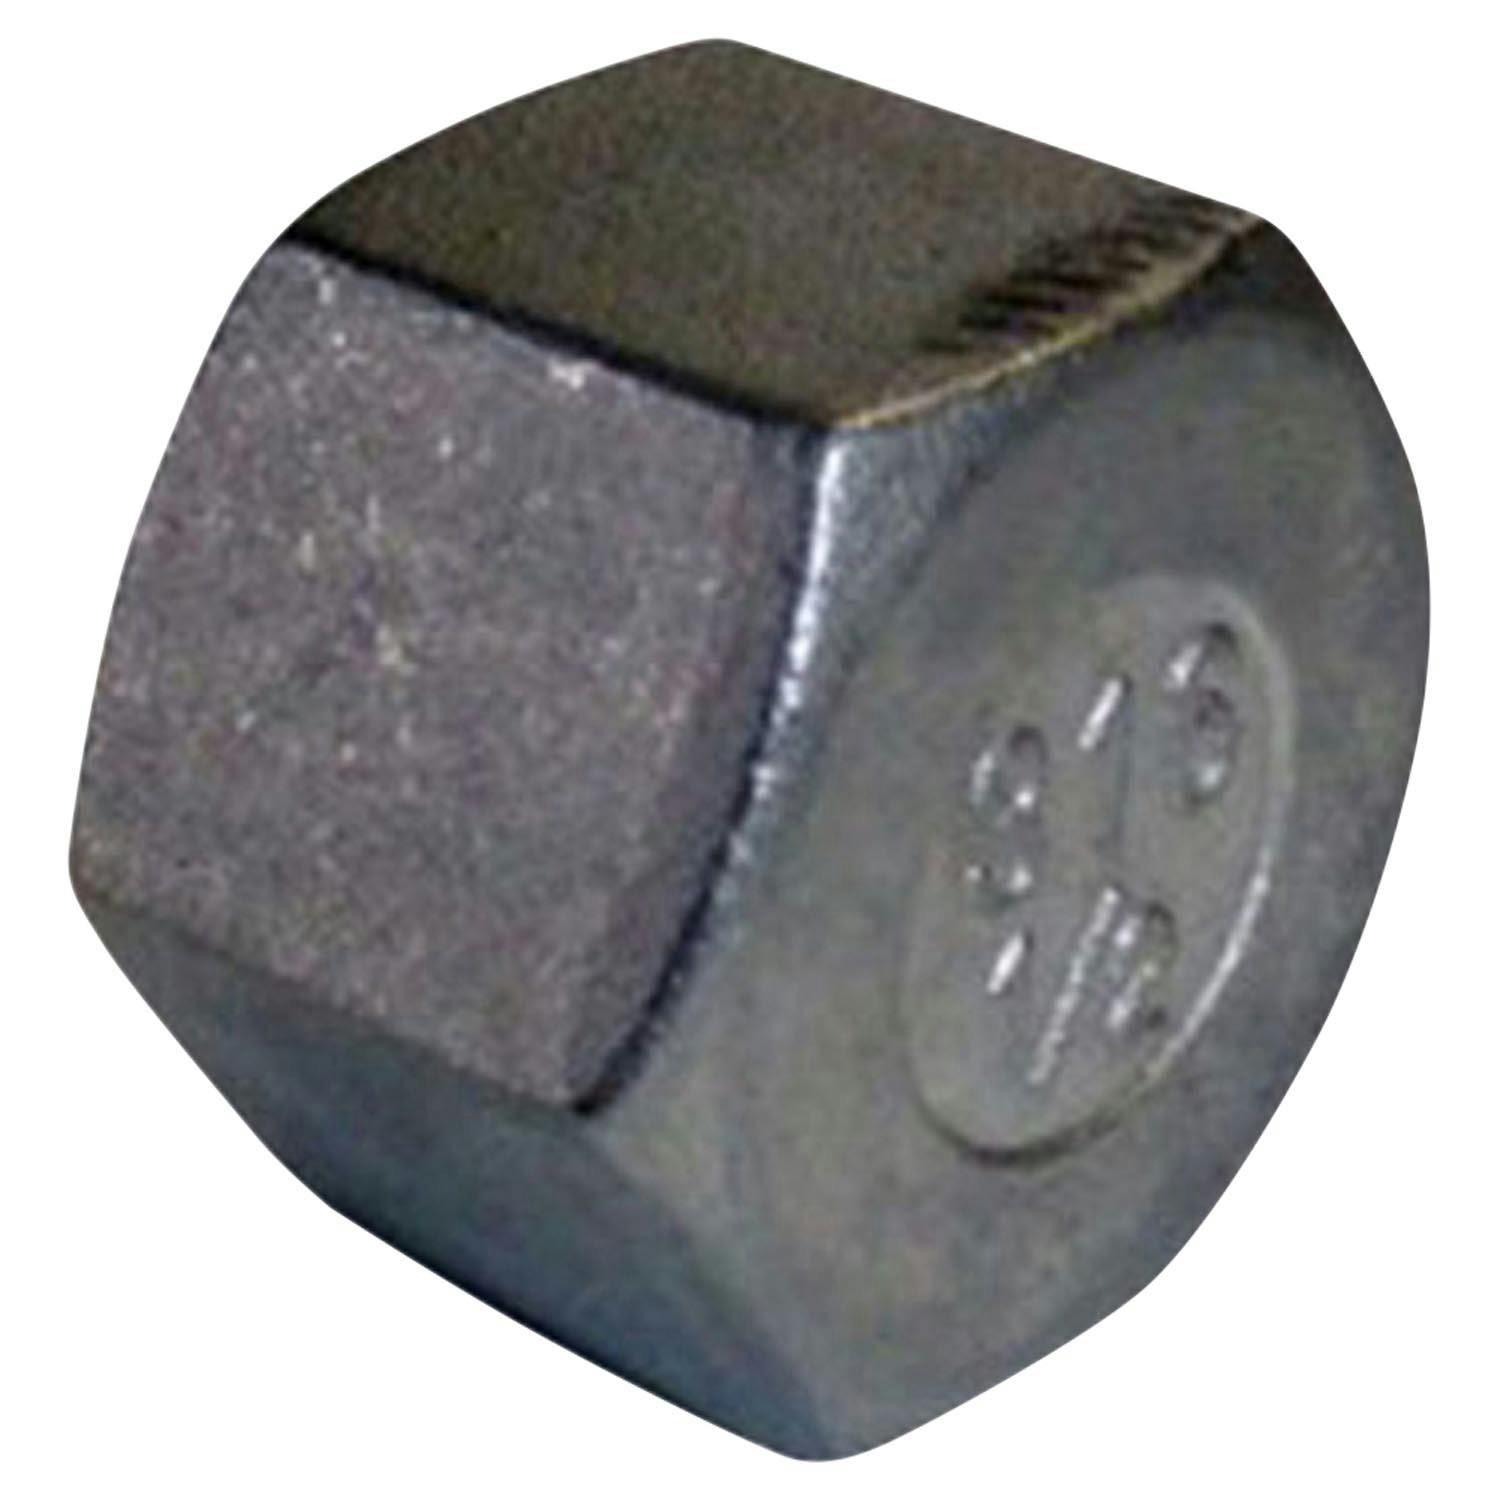 Pratt Hex Cap 15Mm For Auxiliary Outlet On Shower Stanchions